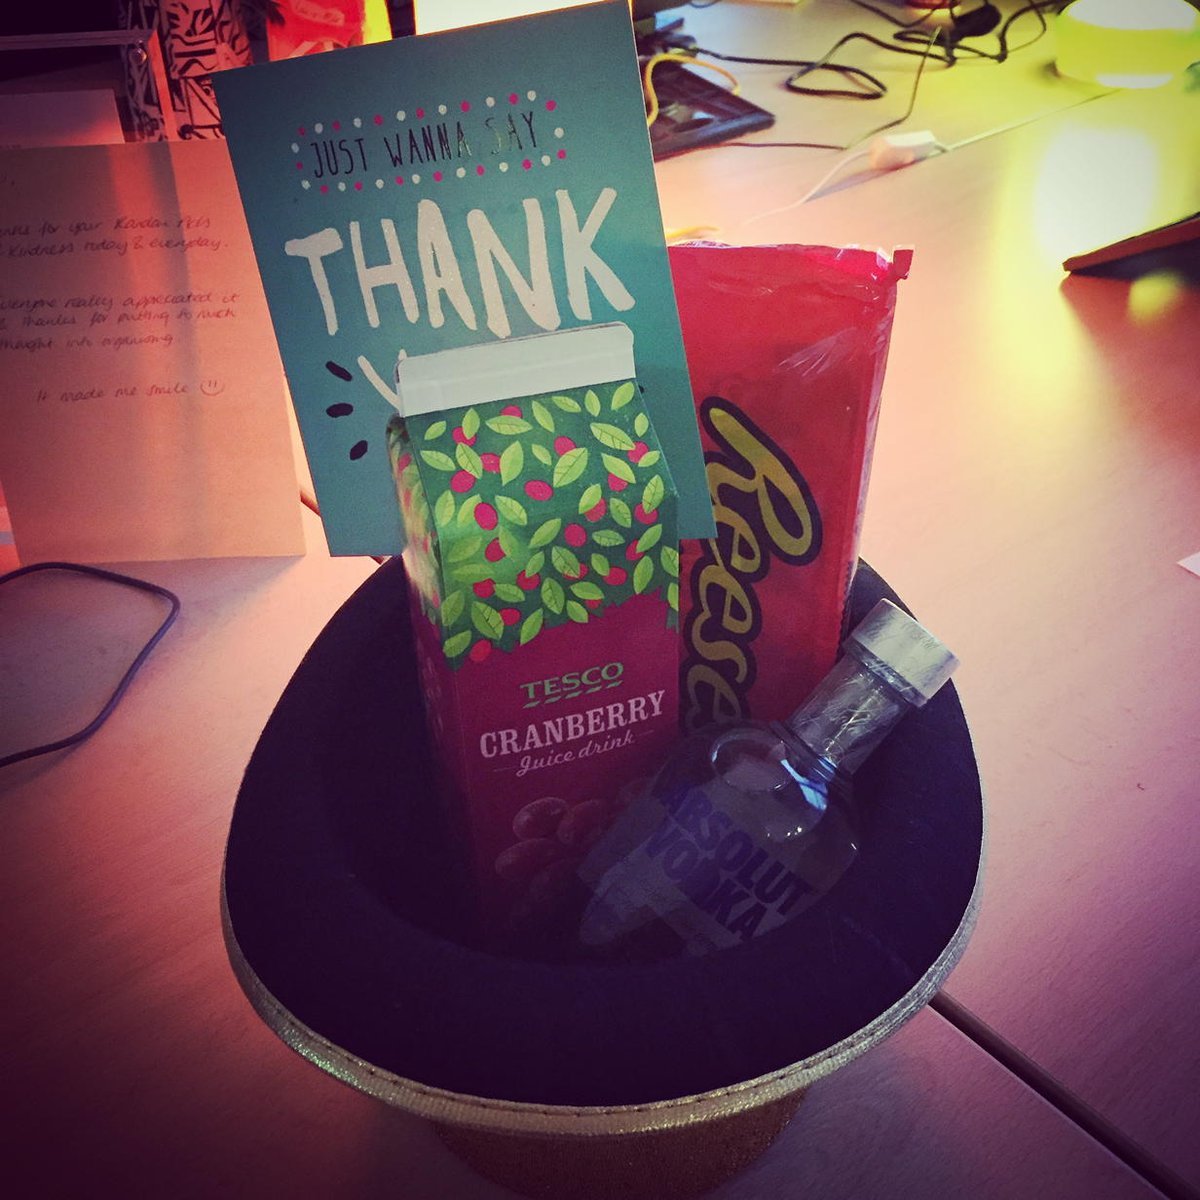 After a day of giving. I received my own hat of goodies. Thank you Ladies :) @TROexperiential #RAOKDay